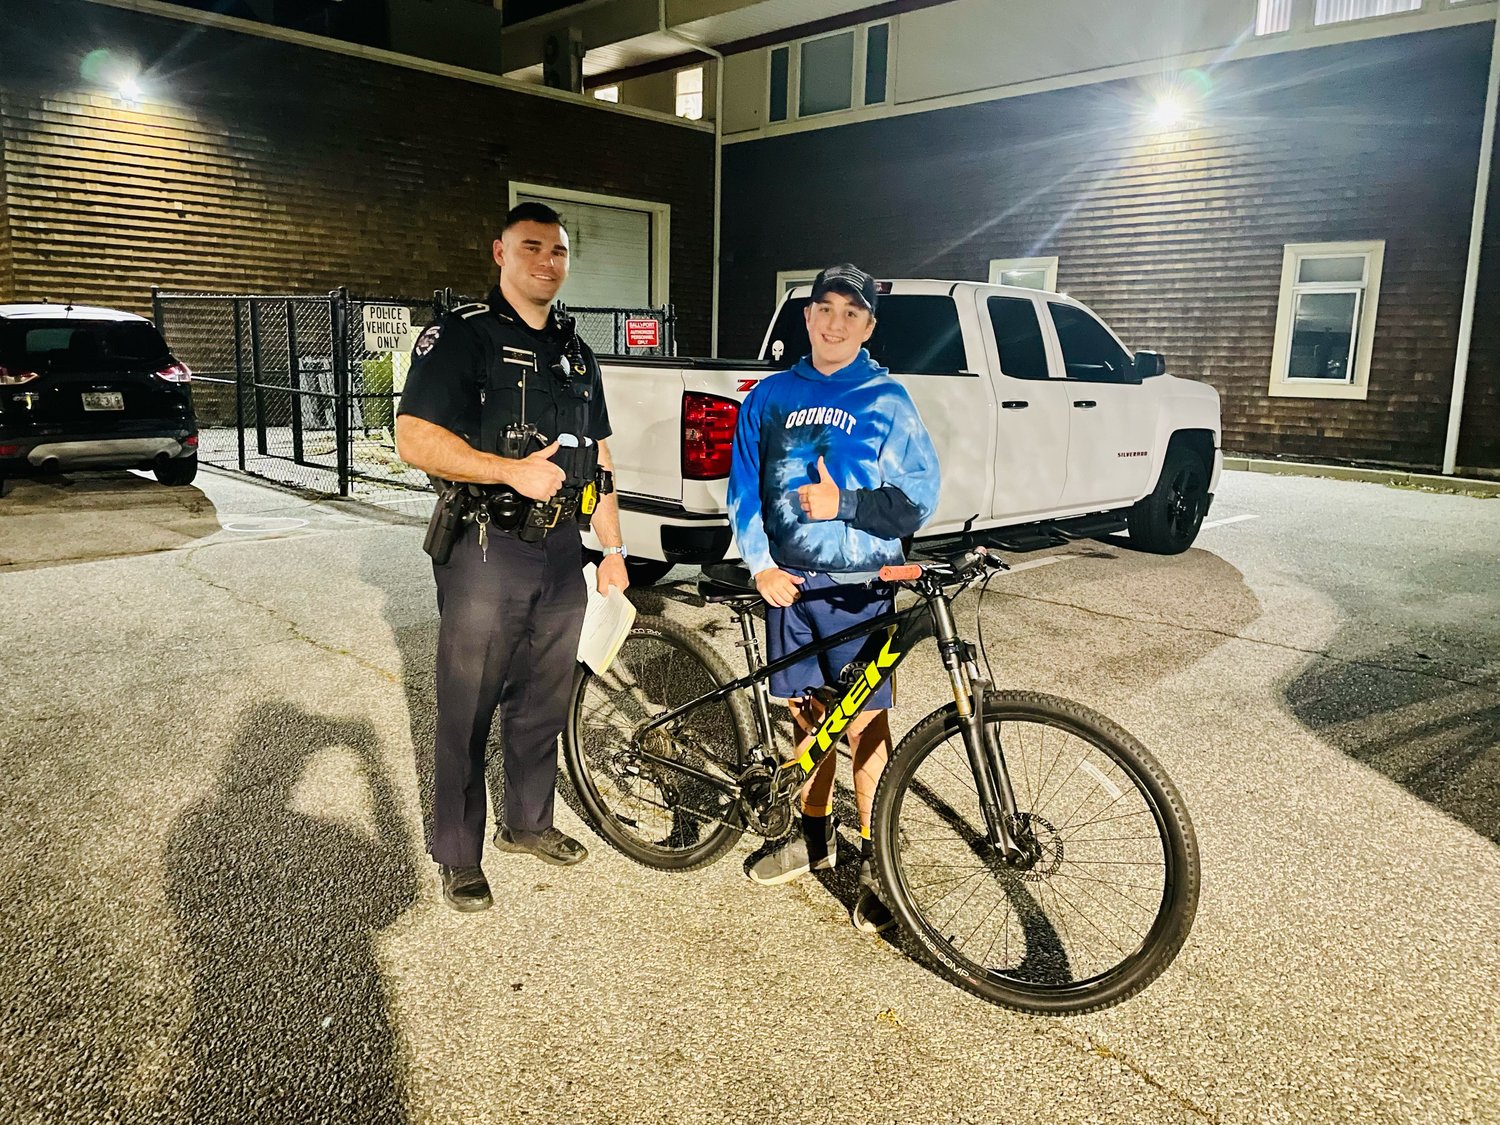 Barrington Police Officer Brendan Combes reunites Barrington resident Brandon Medeiros with his bicycle, which had been stolen last Wednesday.